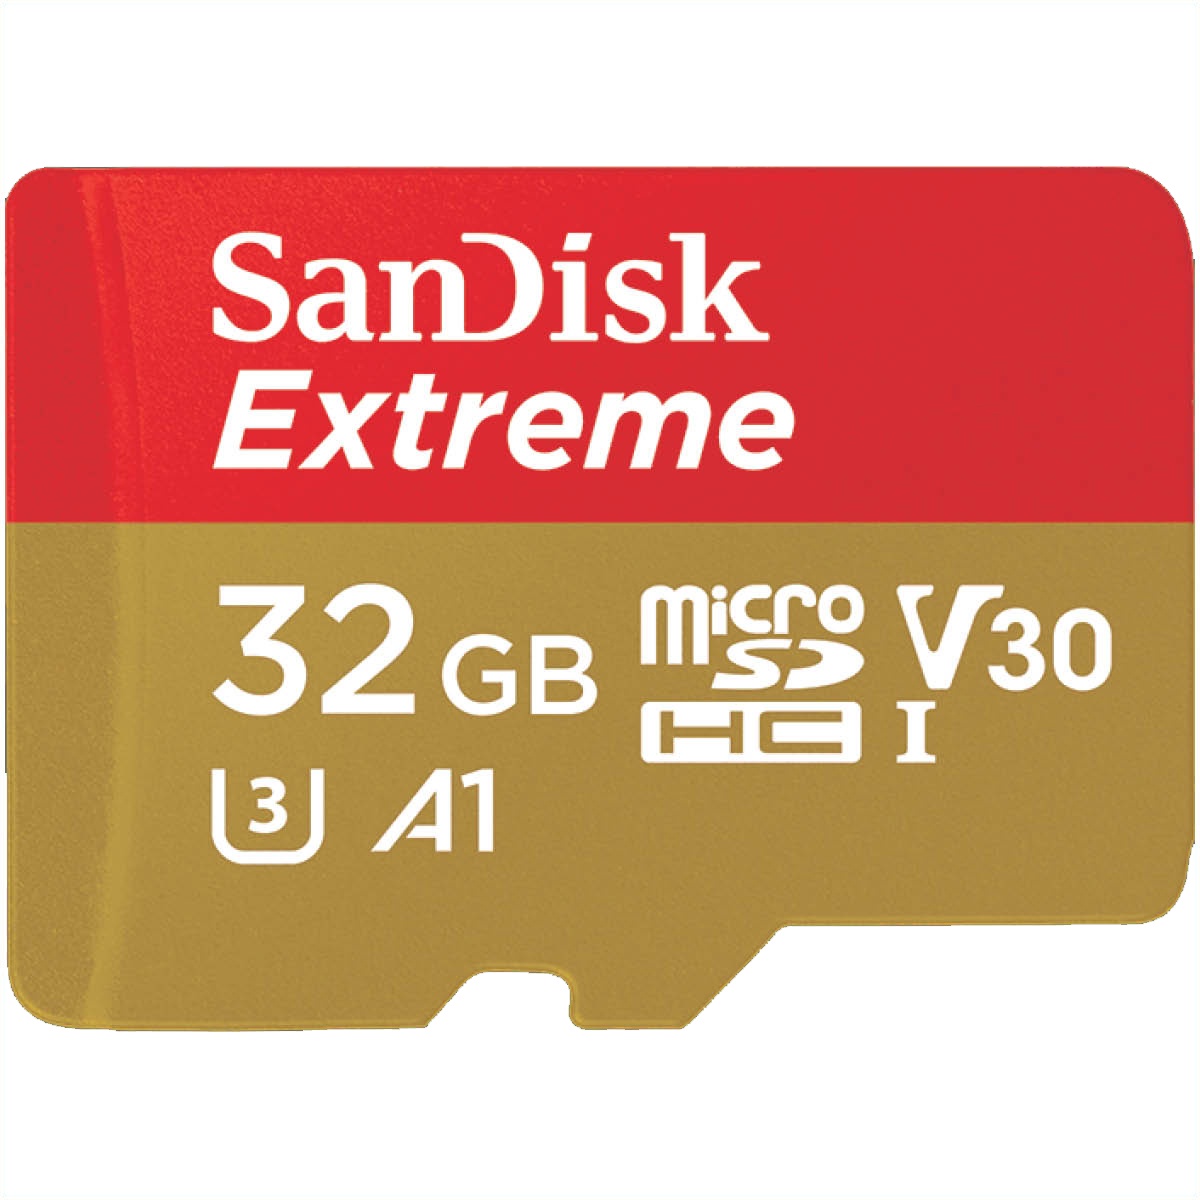 SanDisk 32 GB Micro SDHC Extreme 100 MB/s